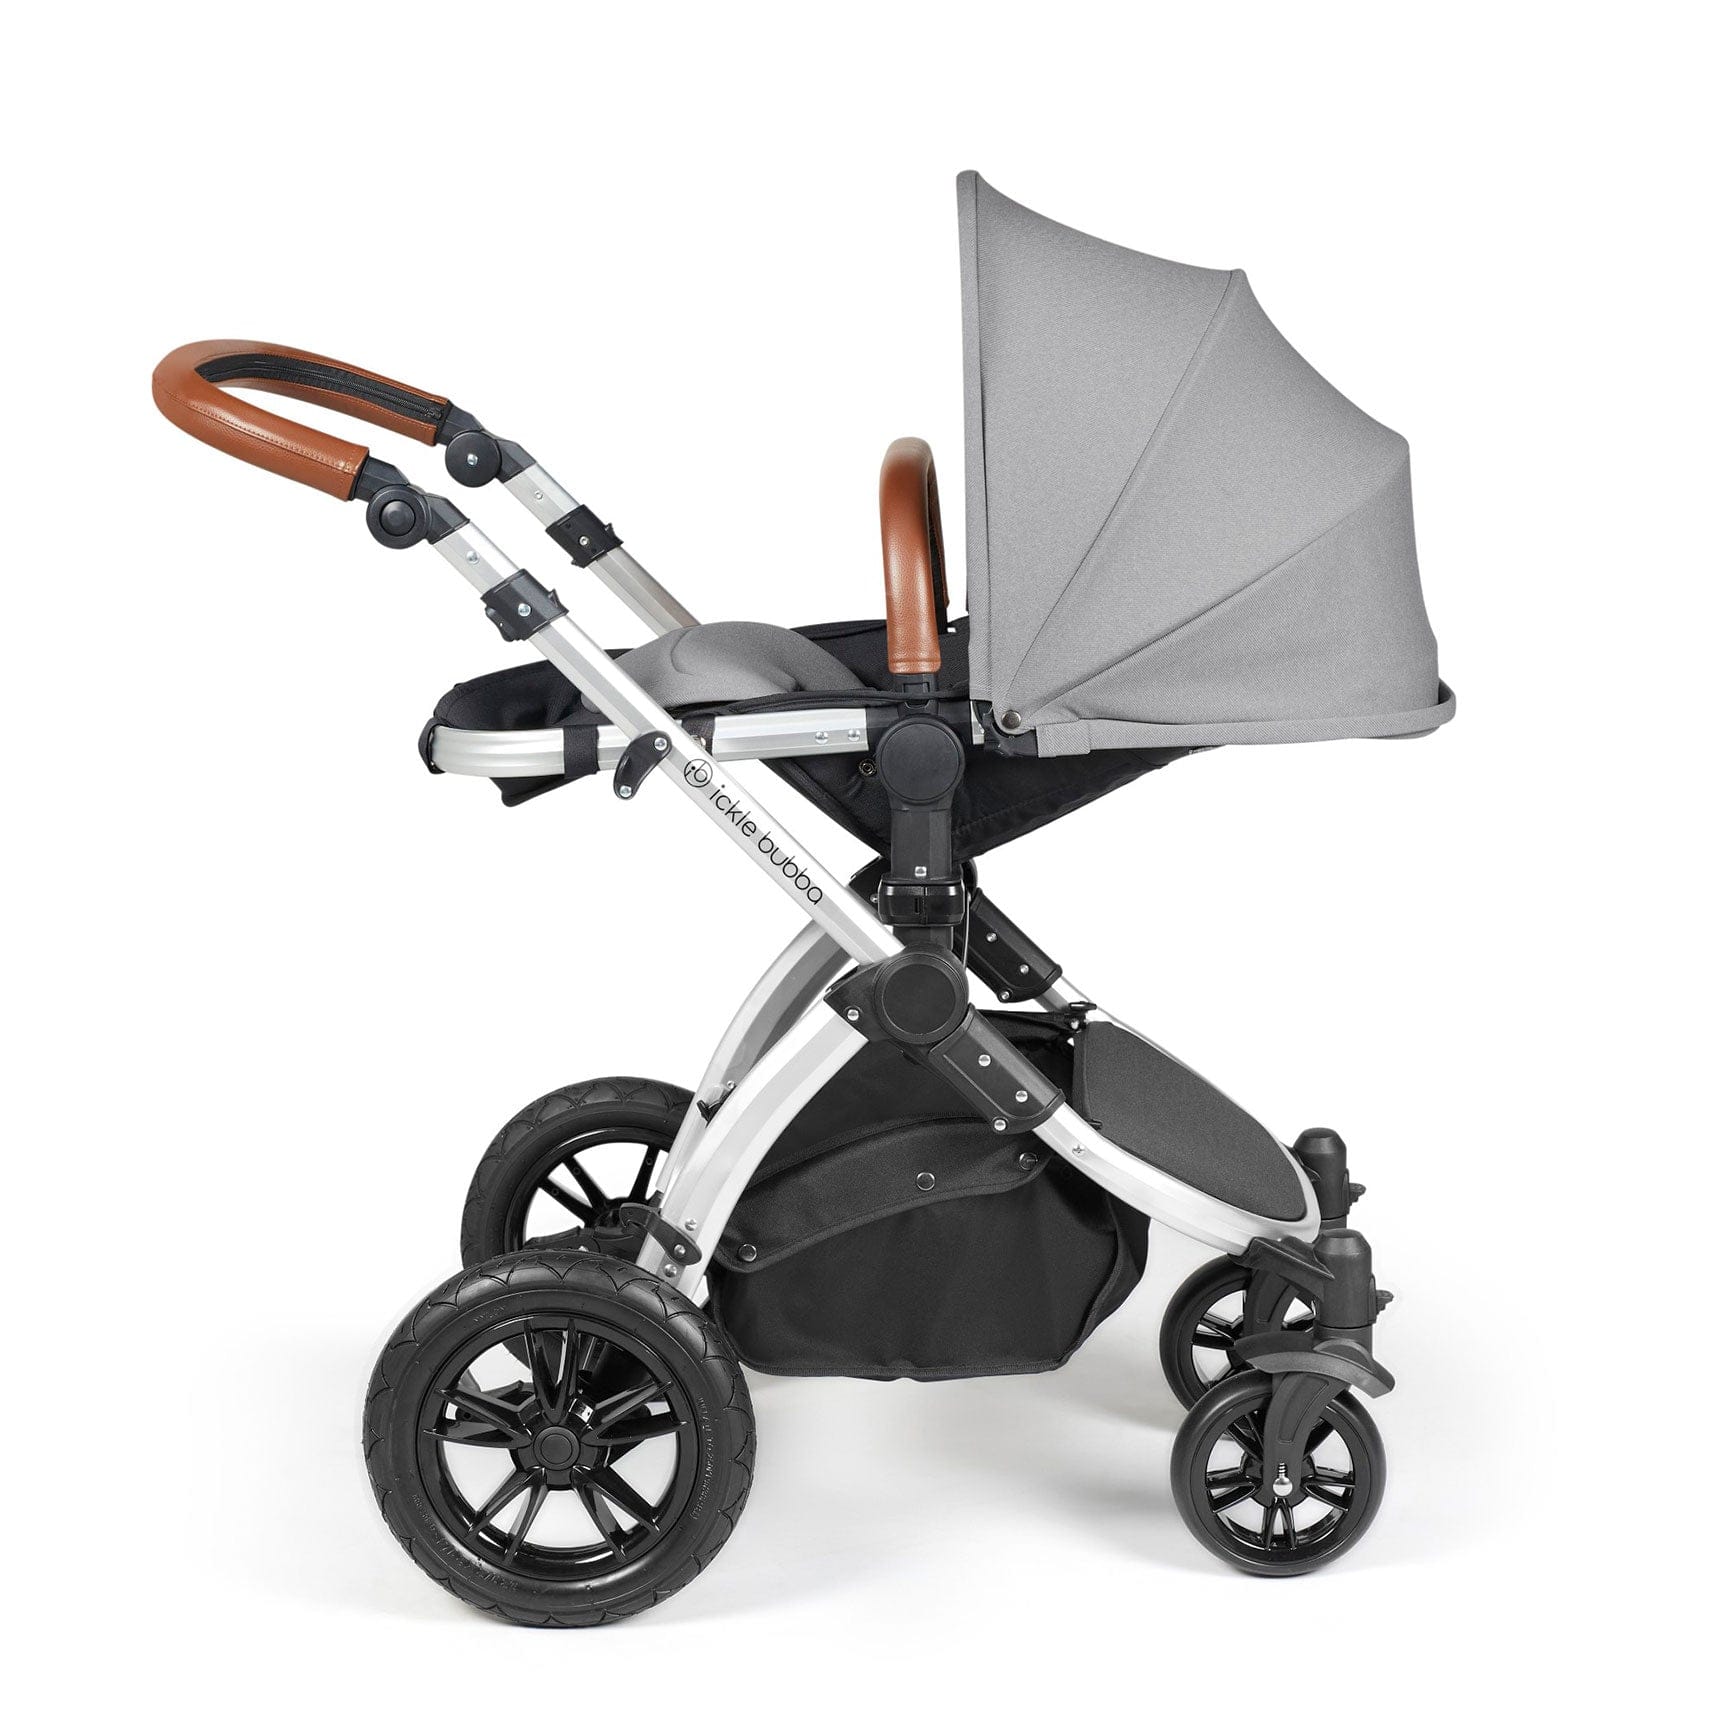 Ickle Bubba travel systems Ickle Bubba Stomp Luxe 2 in 1 Plus Pushchair & Carrycot - Silver/Pearl Grey/Tan 10-003-001-260